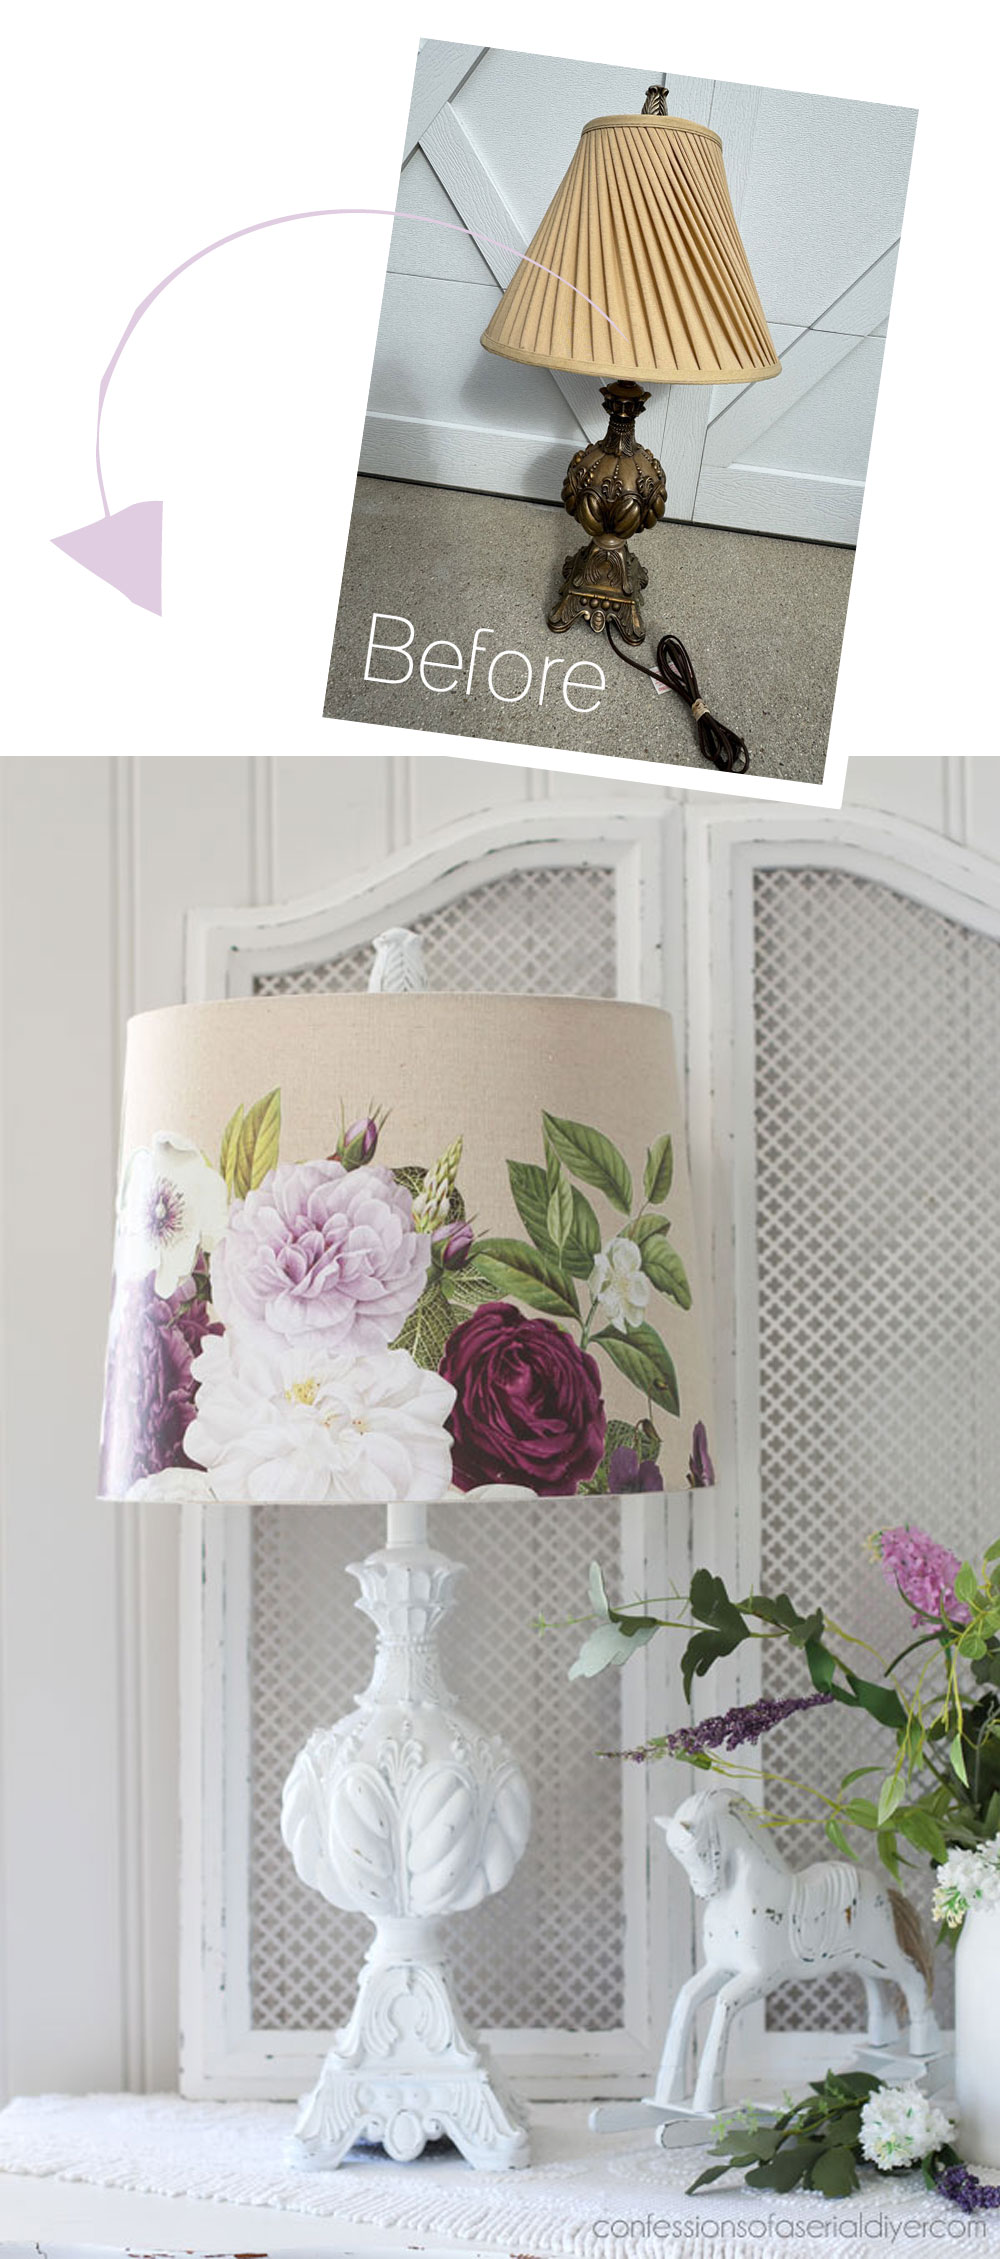 $4 Thrift Store Lamp Update with the Meet Me in the Garden Transfer